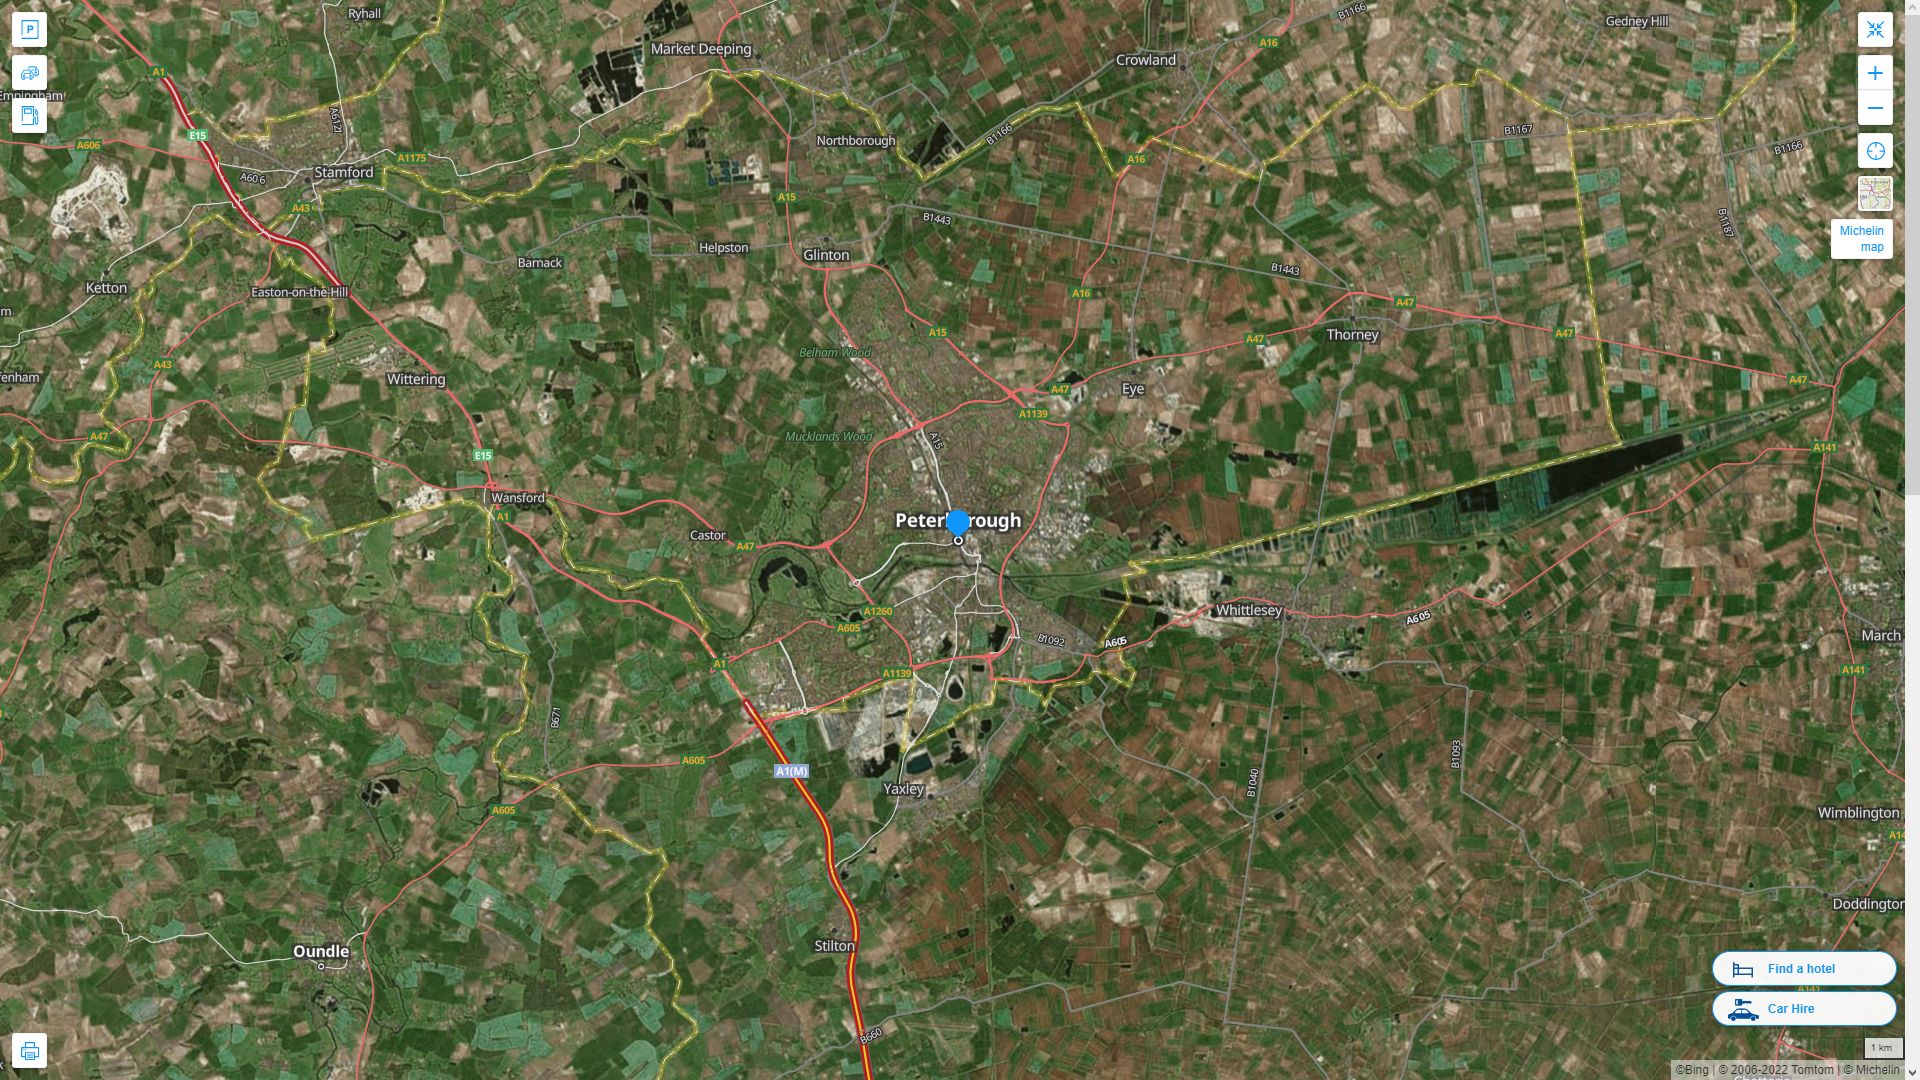 Peterborough Highway and Road Map with Satellite View